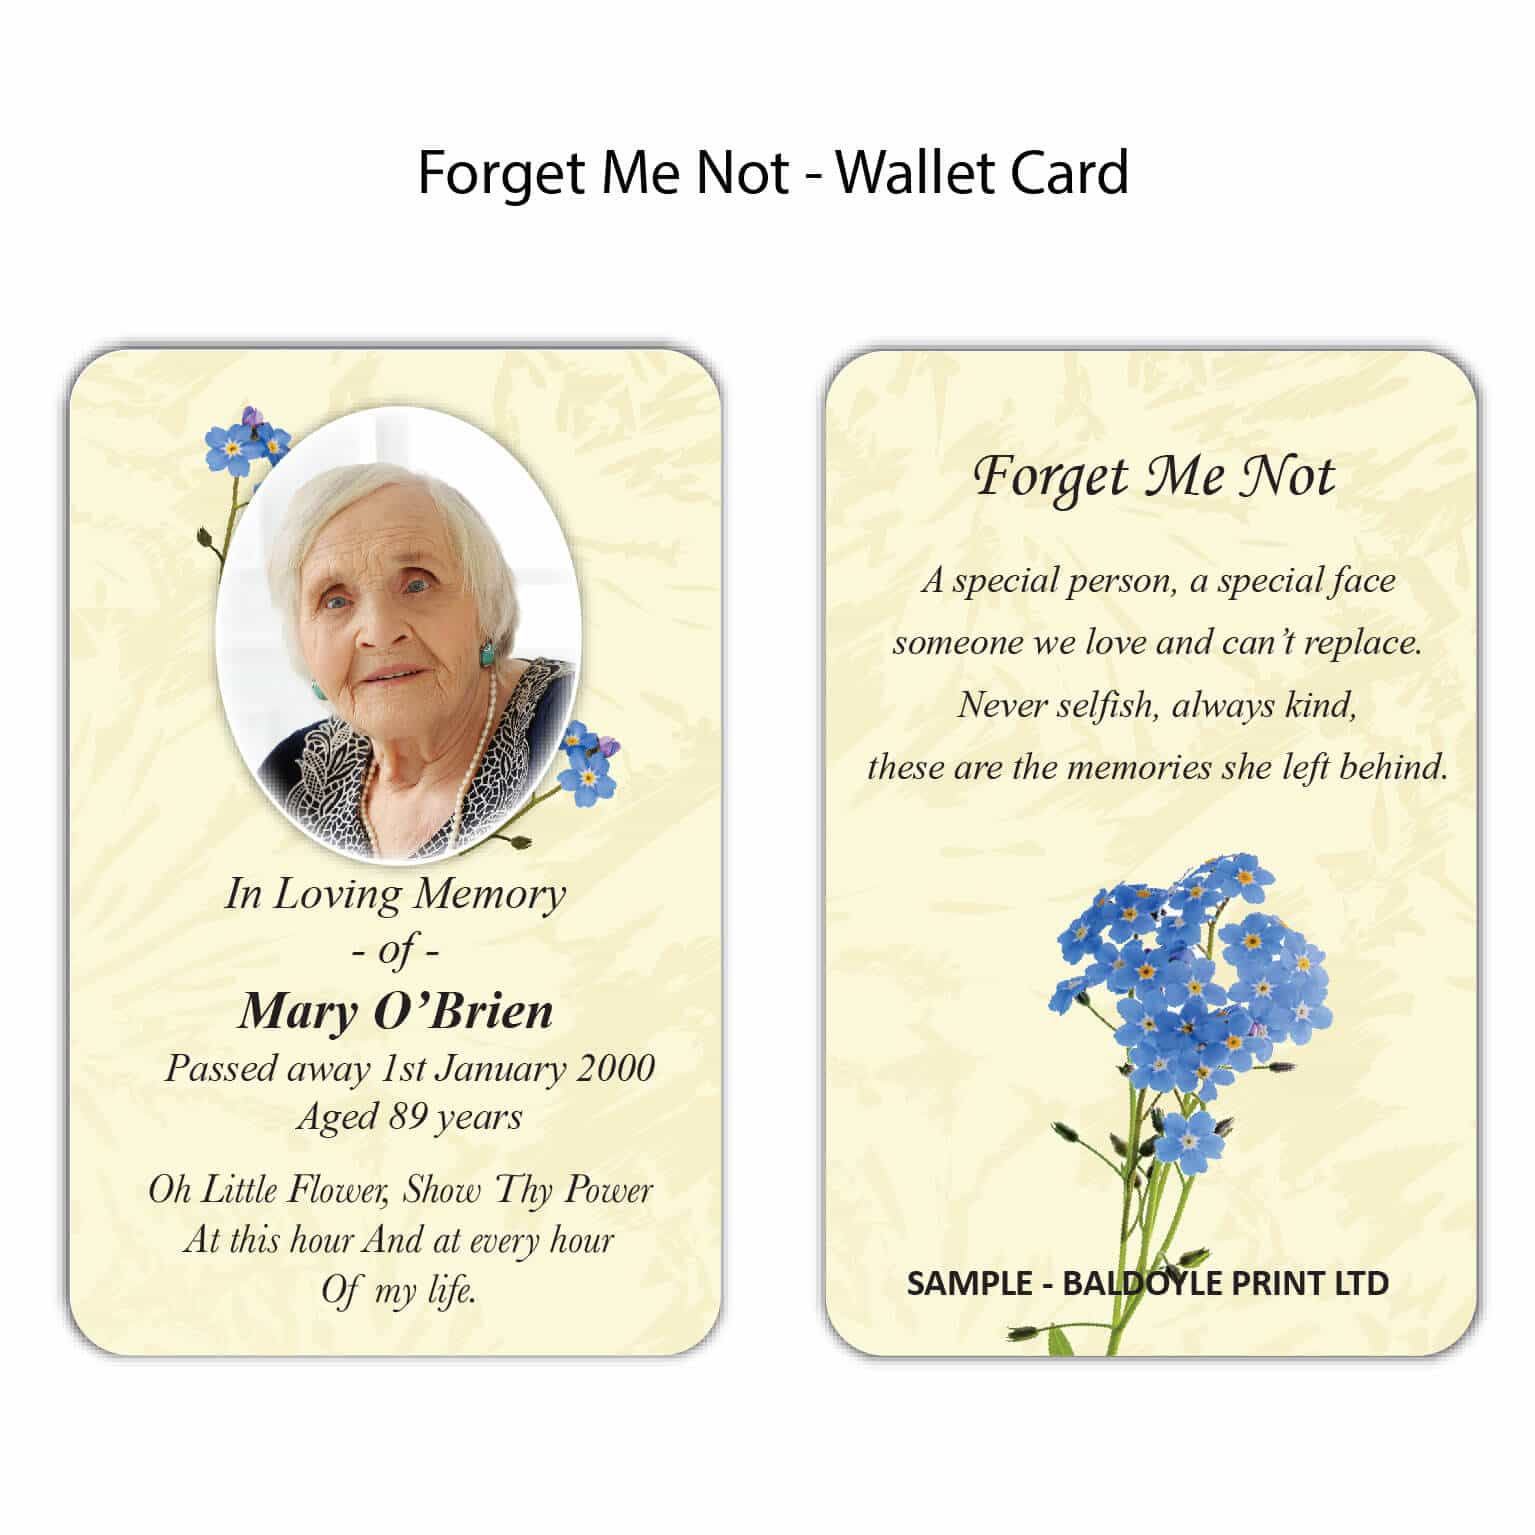 Forget Me Nots Wallet Cards